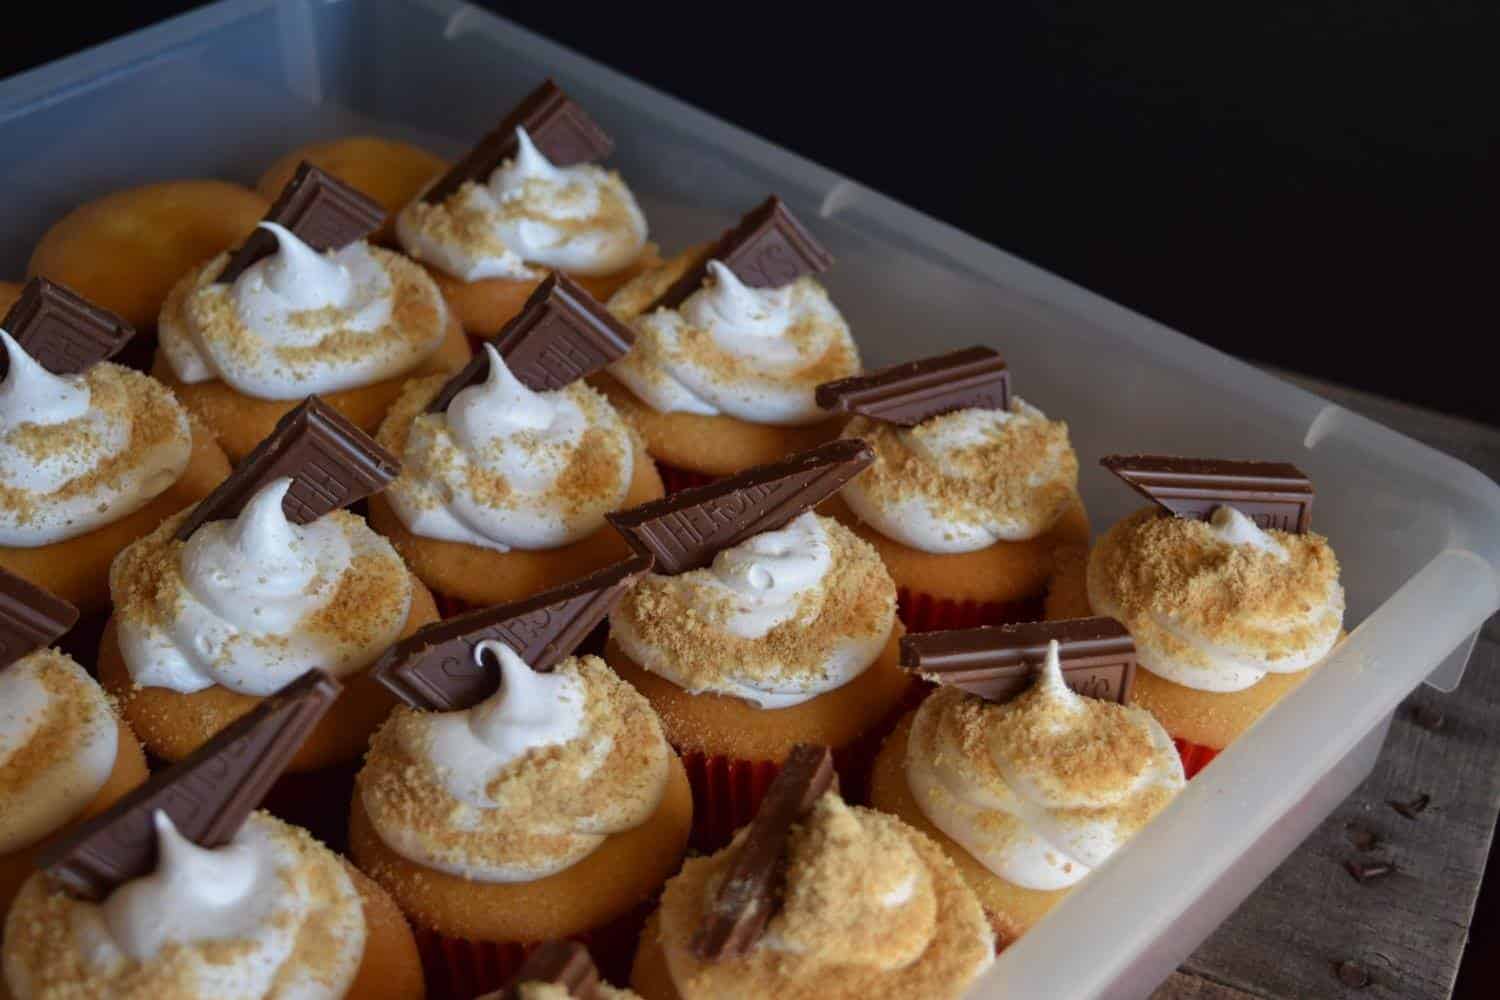 Smores cupcakes in a plastic container for transport